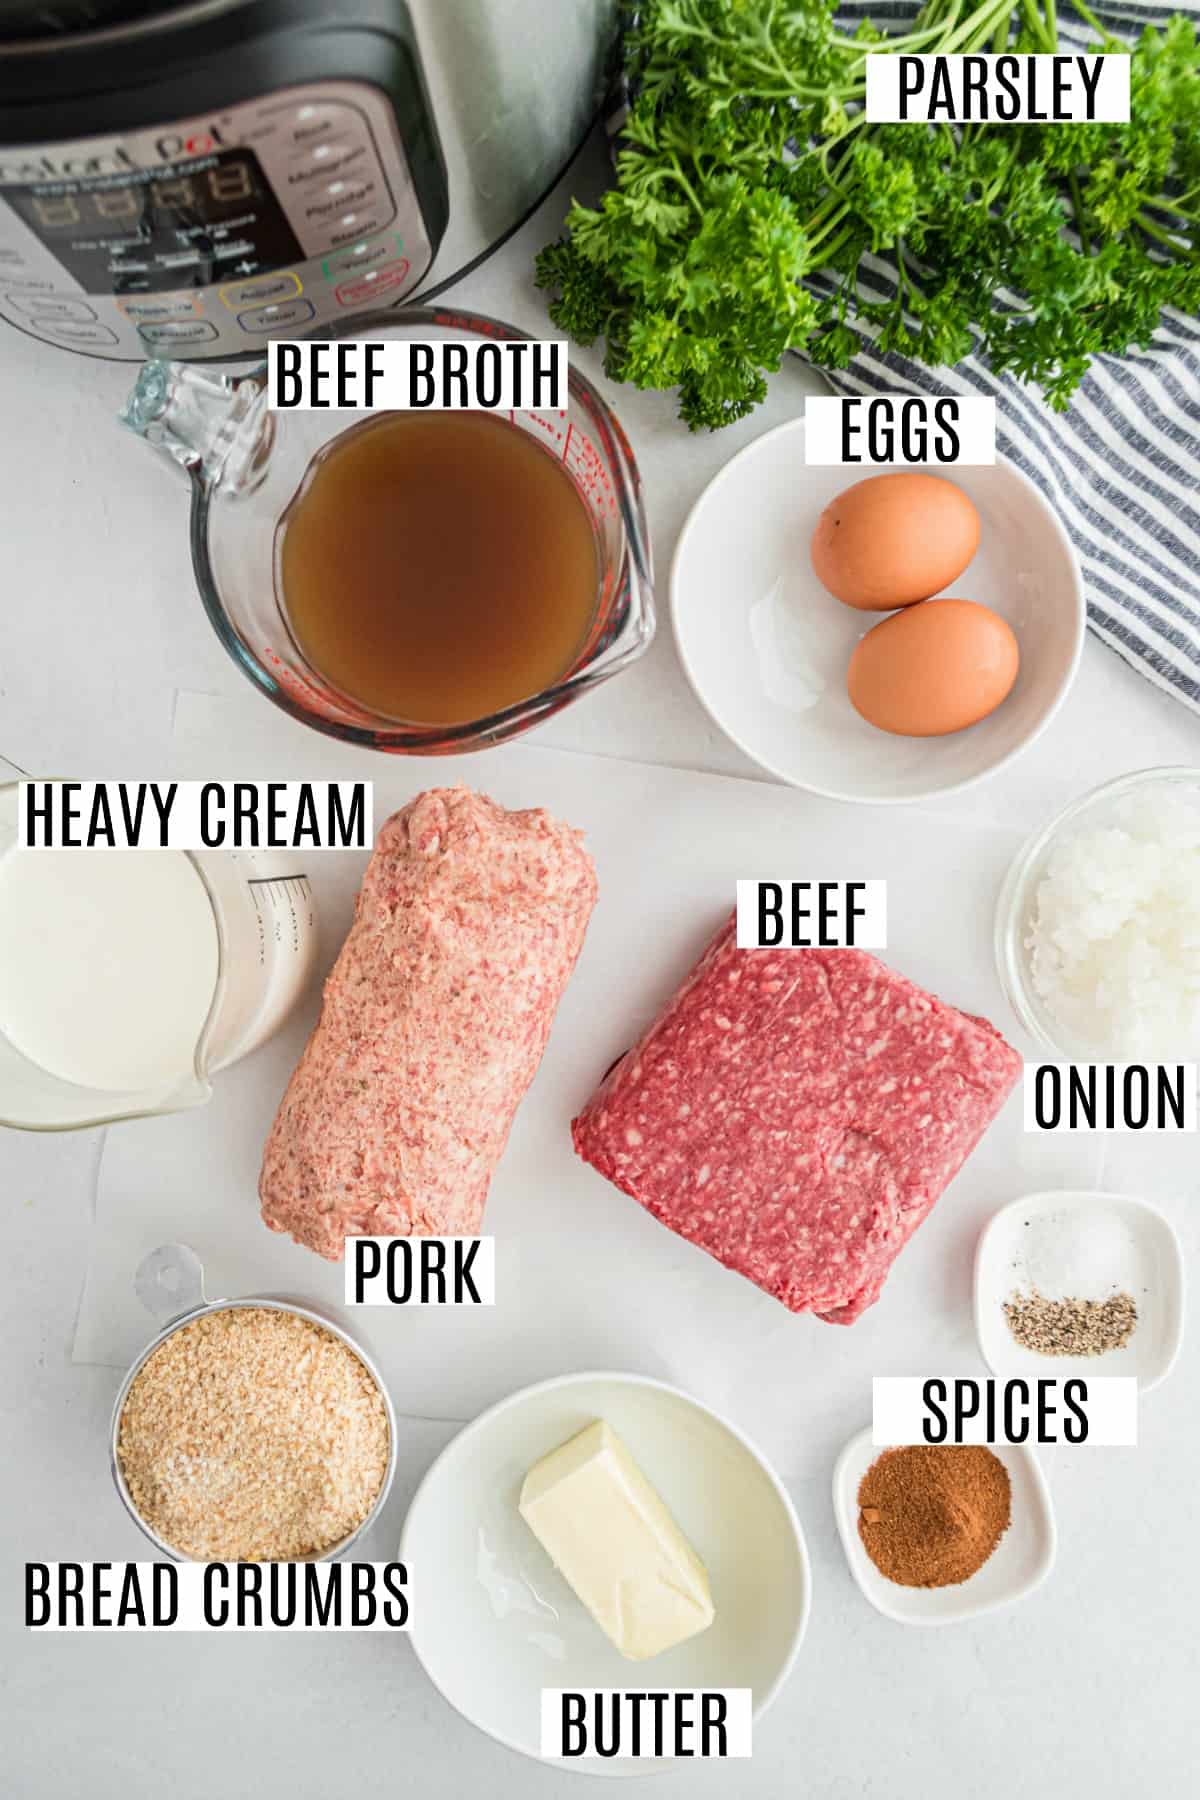 Ingredients needed to make swedish meatballs, including ground beef and pork.